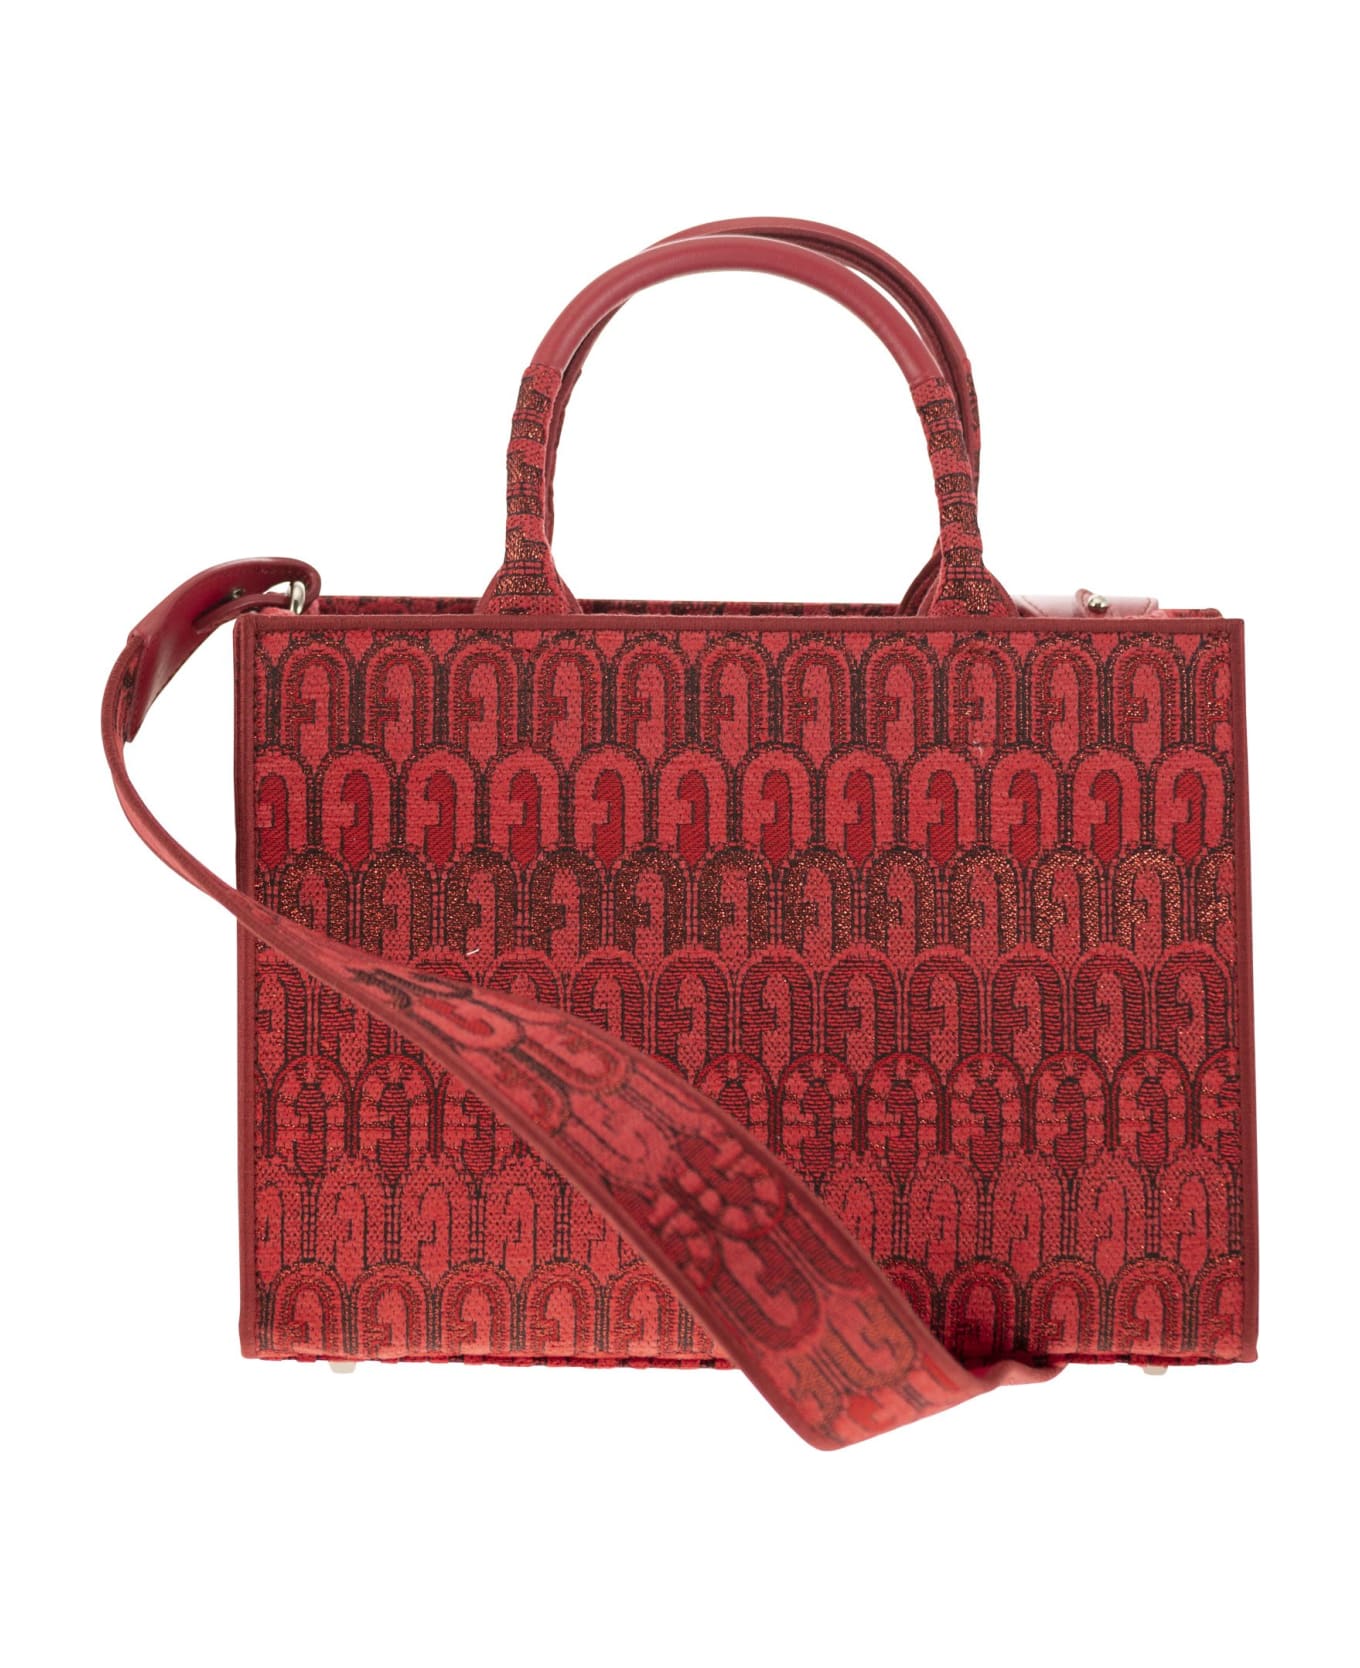 Furla Opportunity - Tote Bag Small - Red トートバッグ